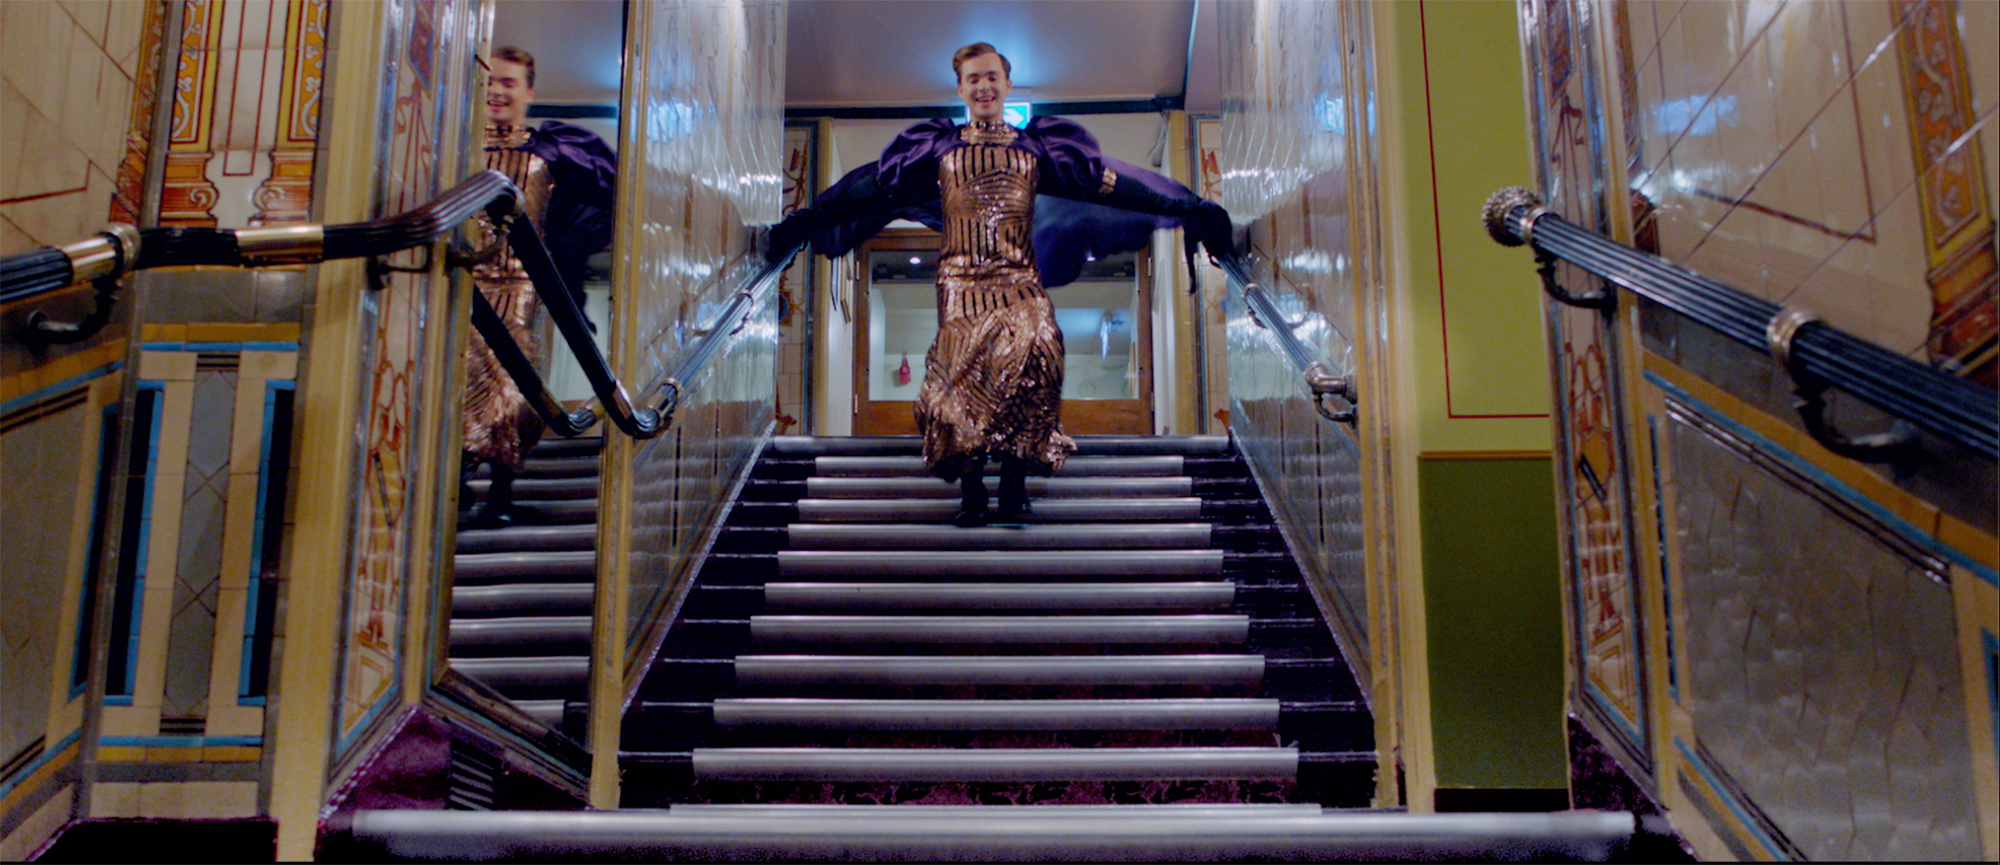 A figure leaps down a staircase within a lavish interior.